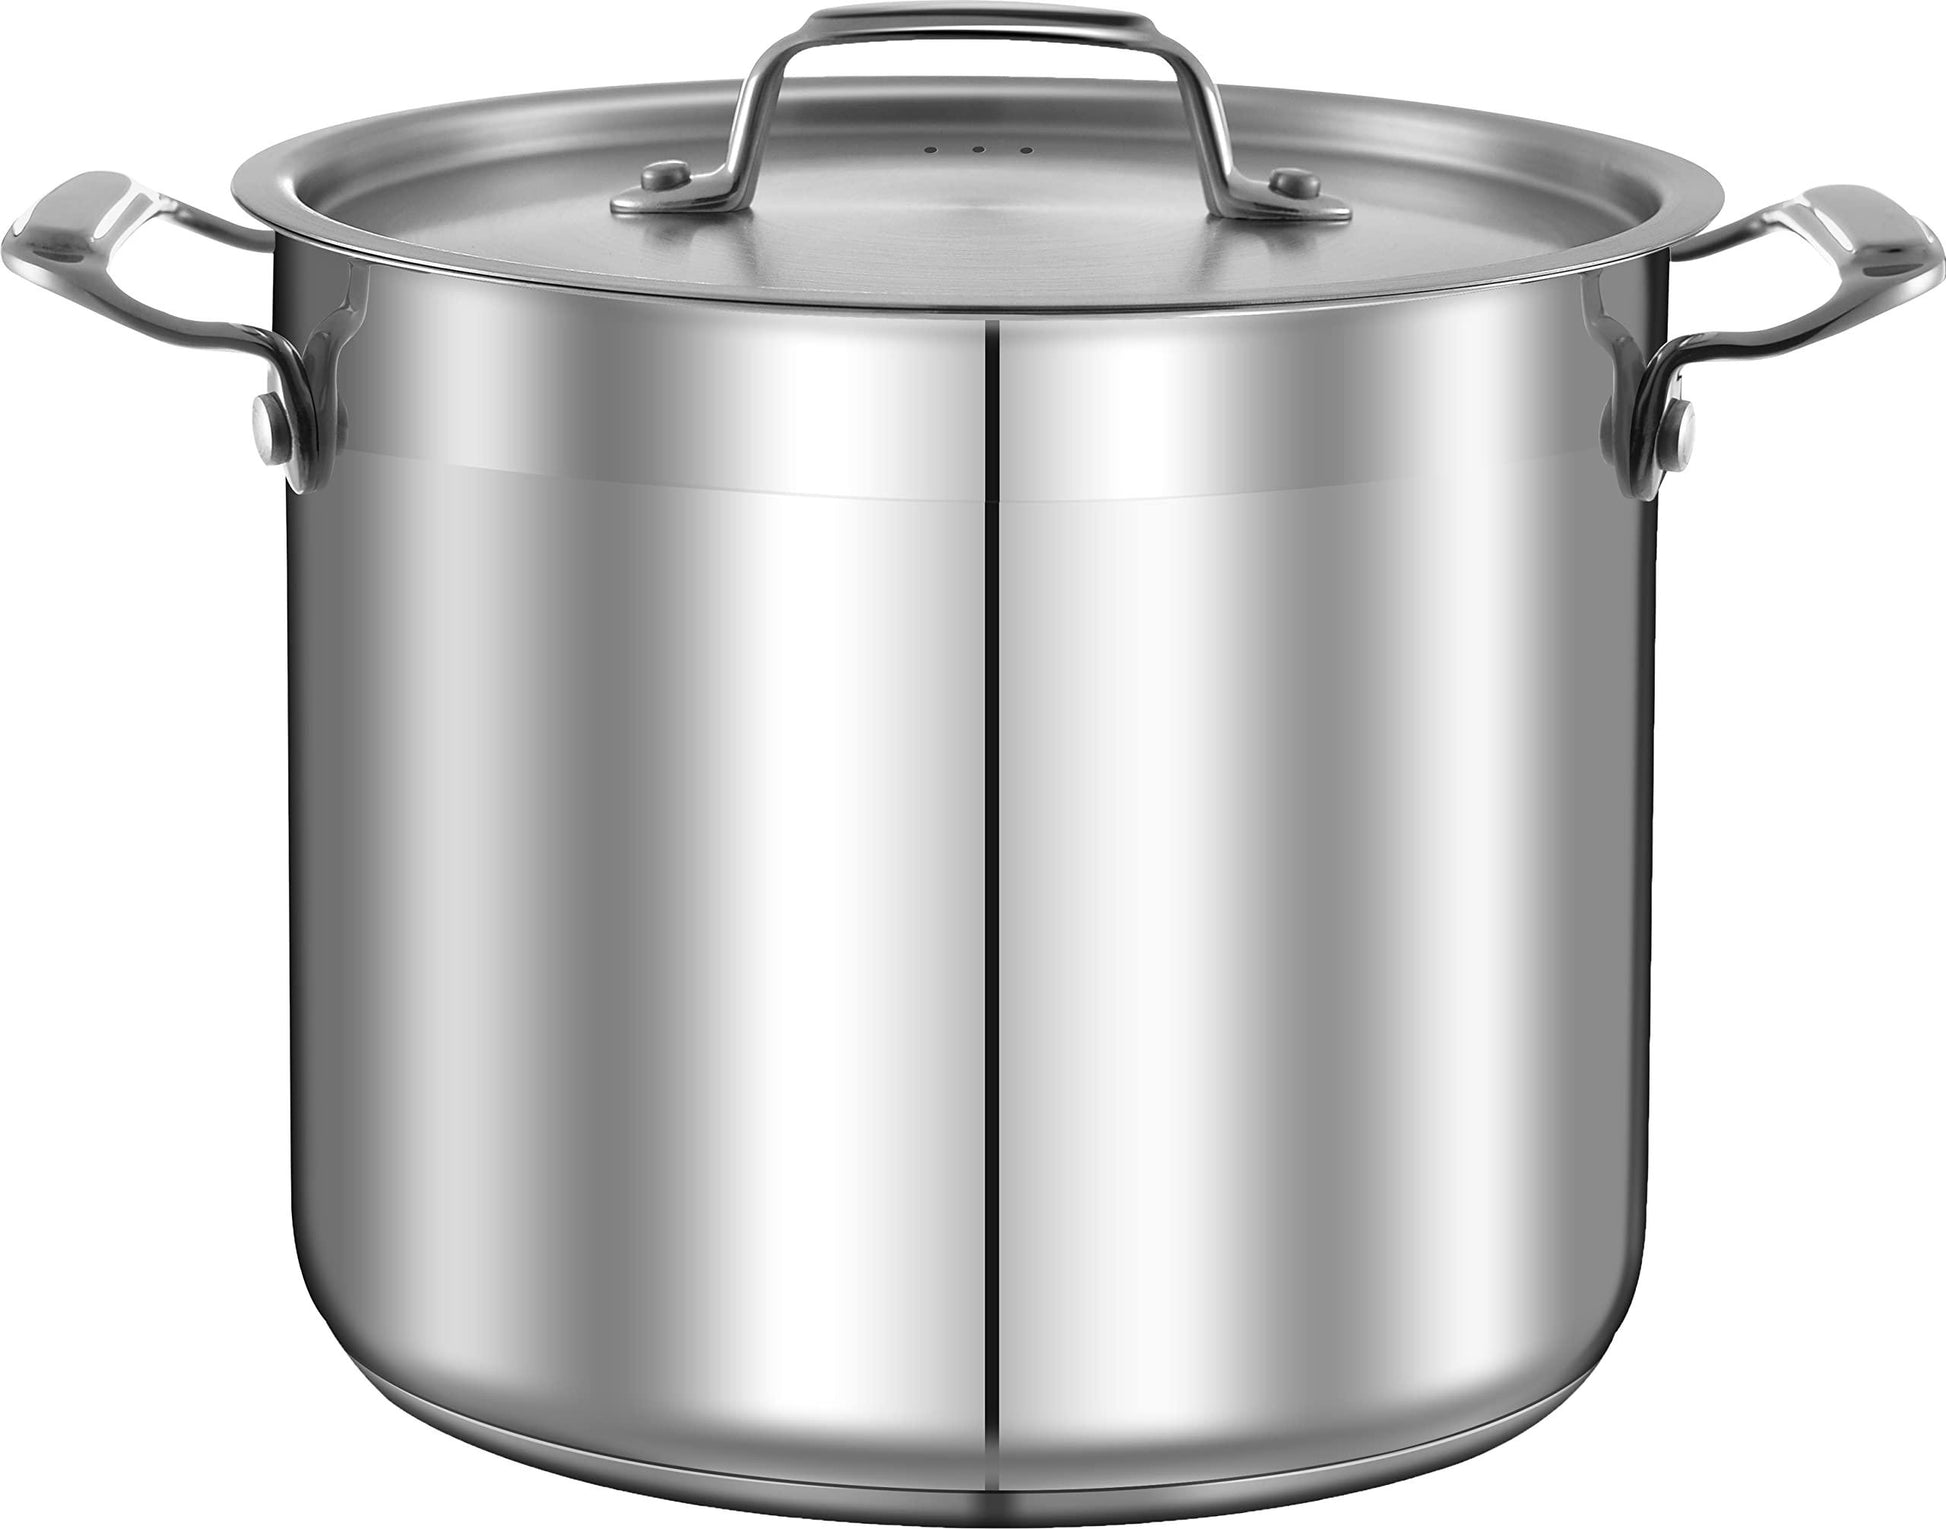 NutriChef Stainless Steel Cookware Stockpot - 14 Quart, Heavy Duty Induction Pot, Soup Pot with Stainless Steel, Lid, Induction, Ceramic, Glass and Halogen Cooktops Compatible - NCSPT14Q - CookCave